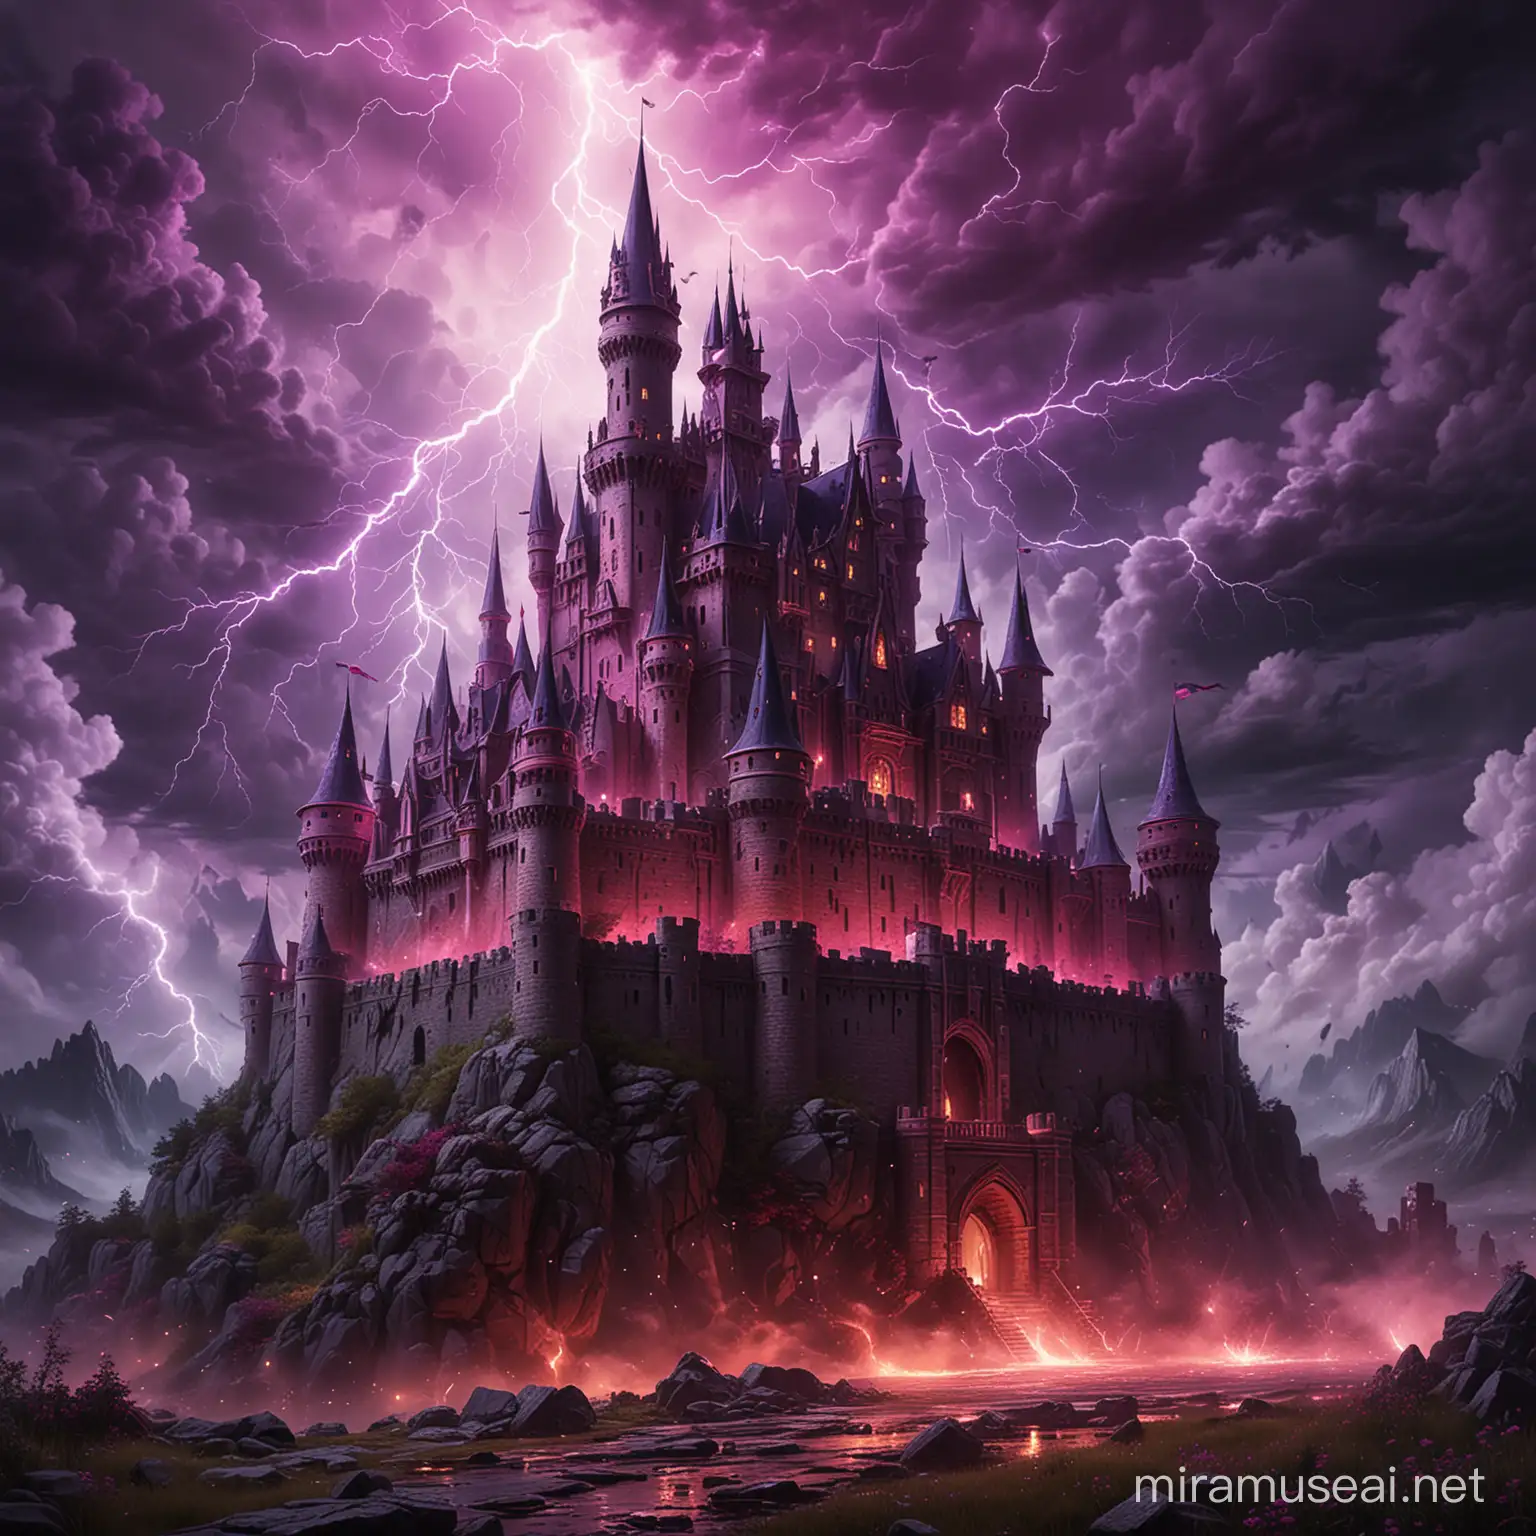 Eerie Castle Illuminated by Thunderstorm at Night